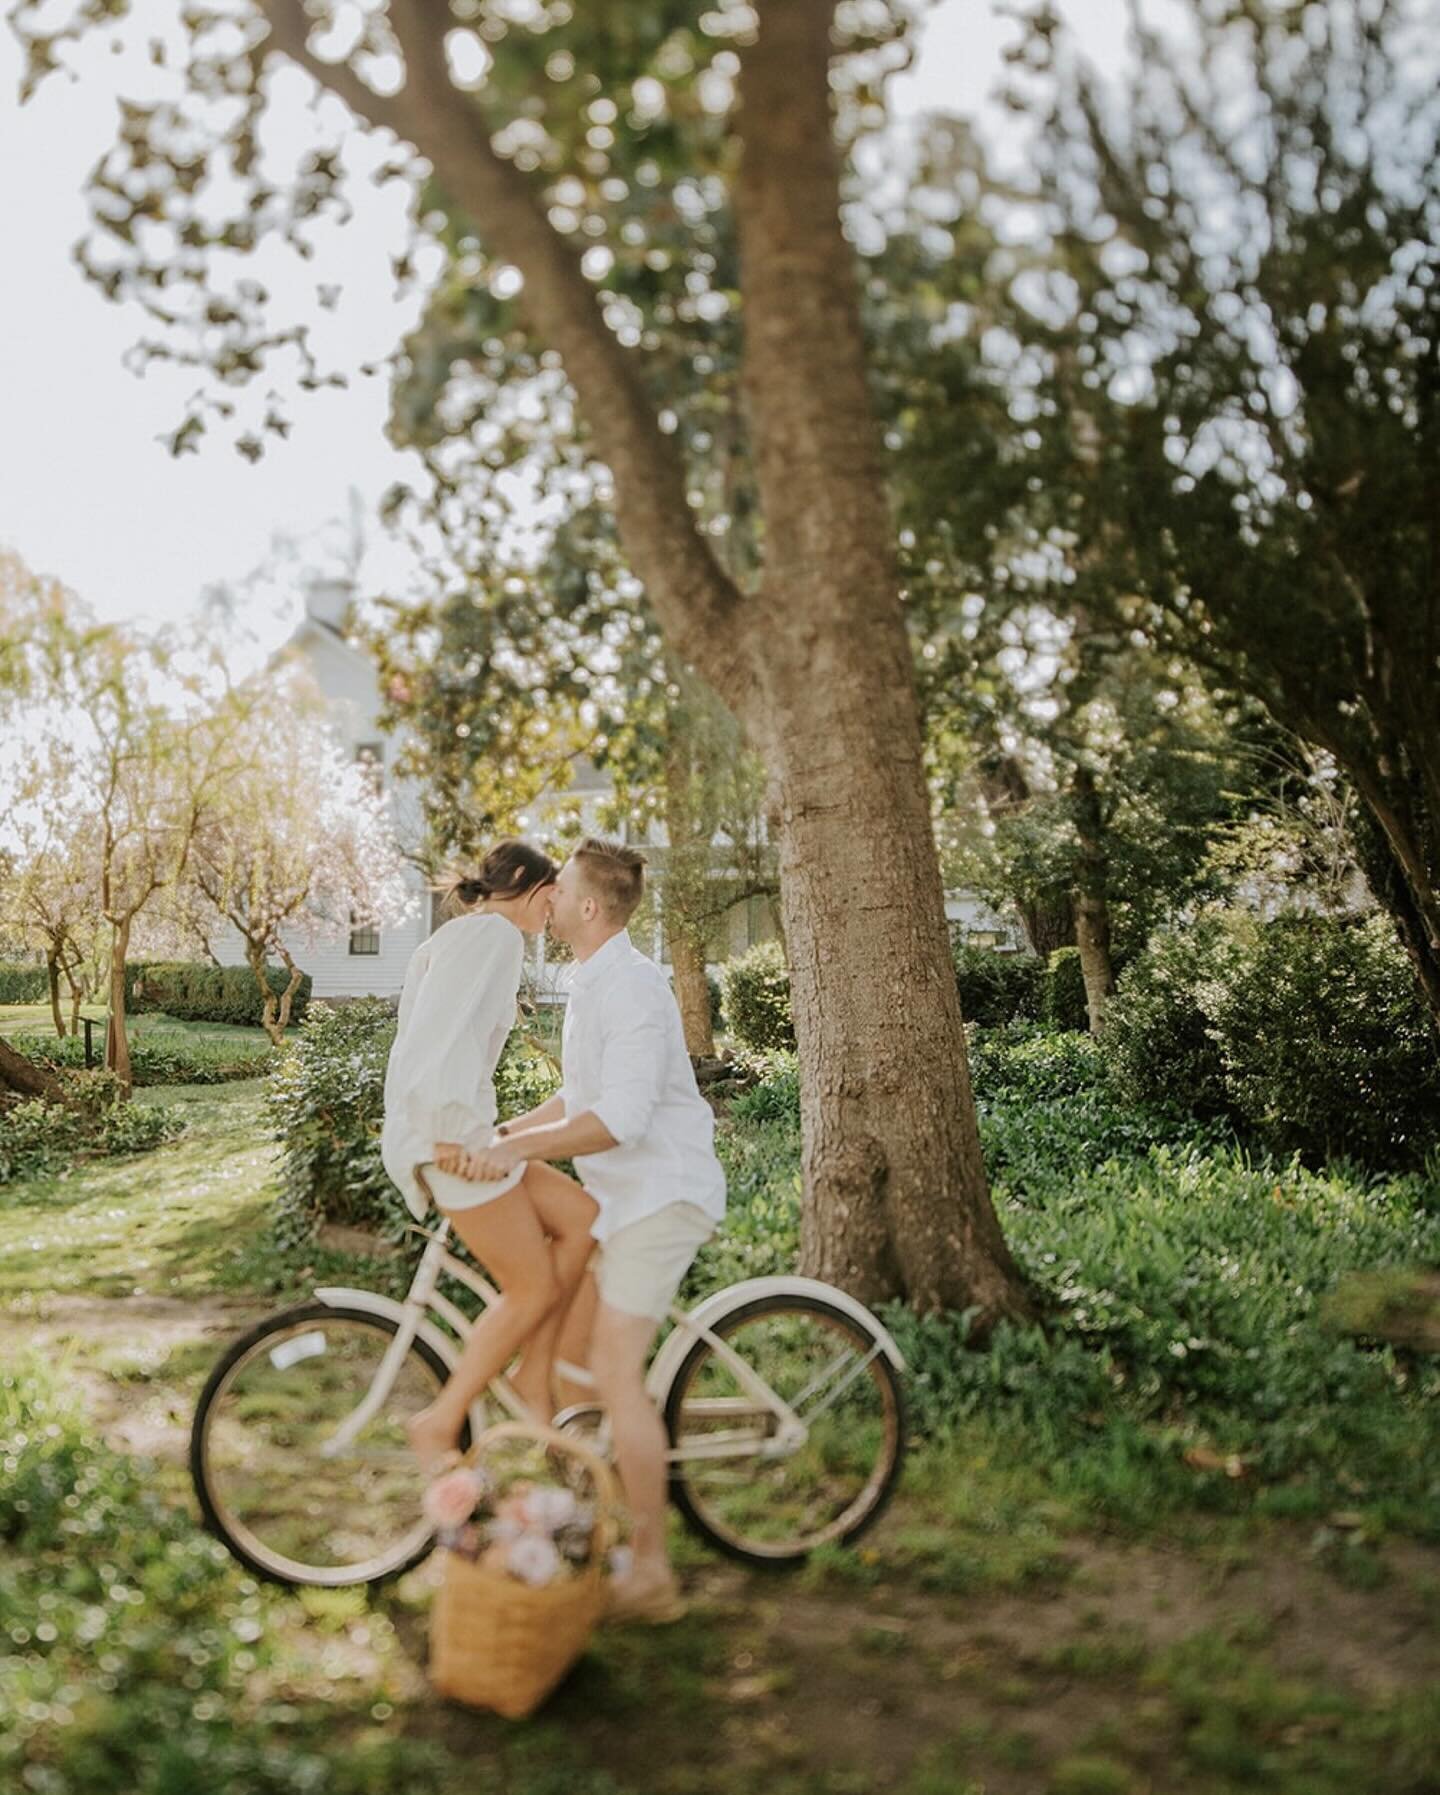 When you think of an engagement session as a date, a whole world of possibilities opens up. I just loved how this picnic and bike riding day went! Slow and sweet with poetry reading, snacks, and bikes. What could be better?